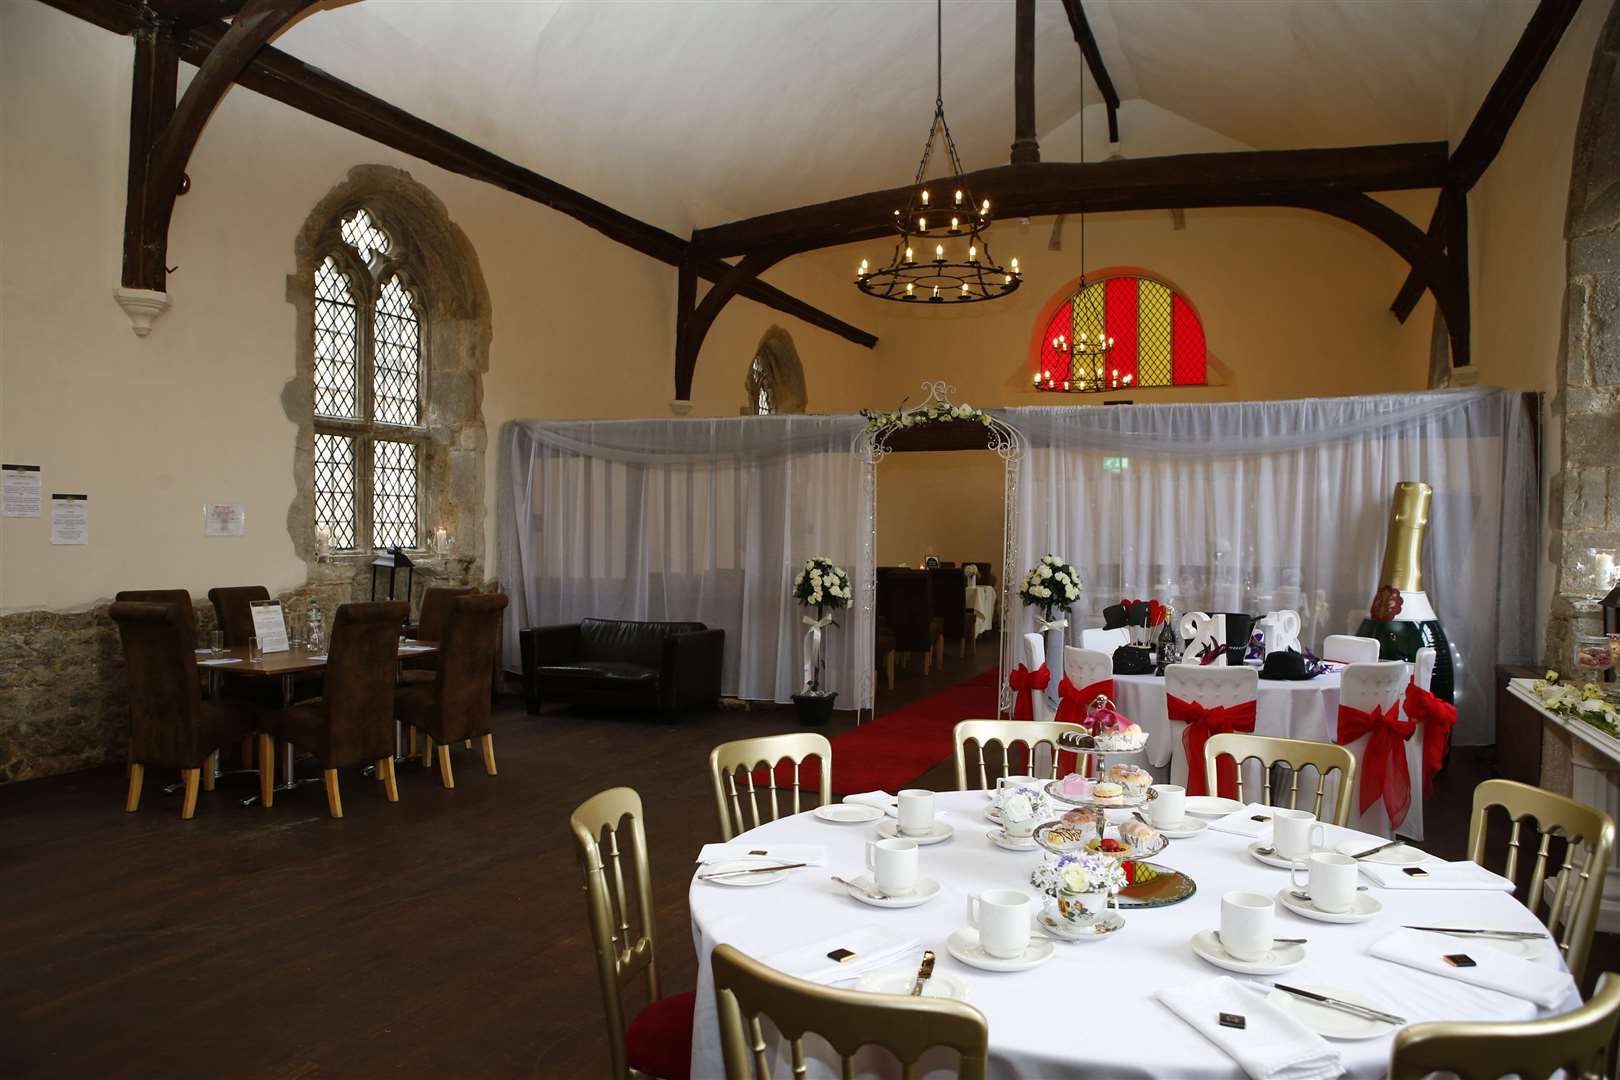 It was previously used as a medieval banqueting hall, party or wedding venue